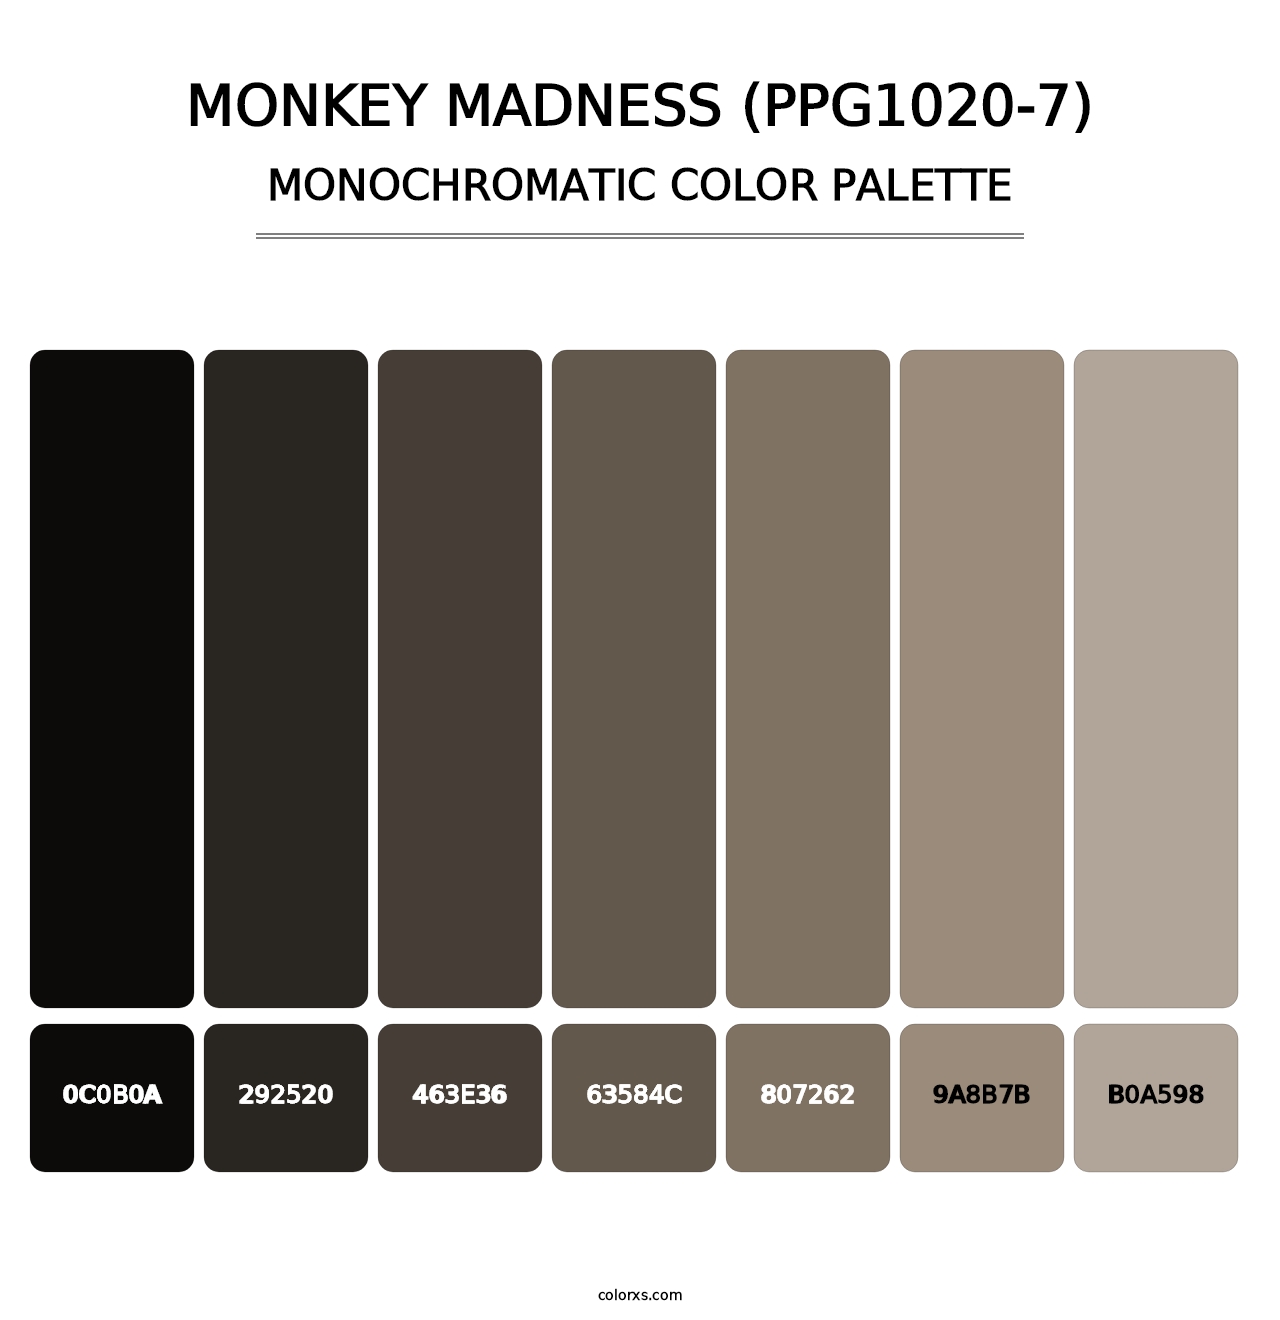 Monkey Madness (PPG1020-7) - Monochromatic Color Palette